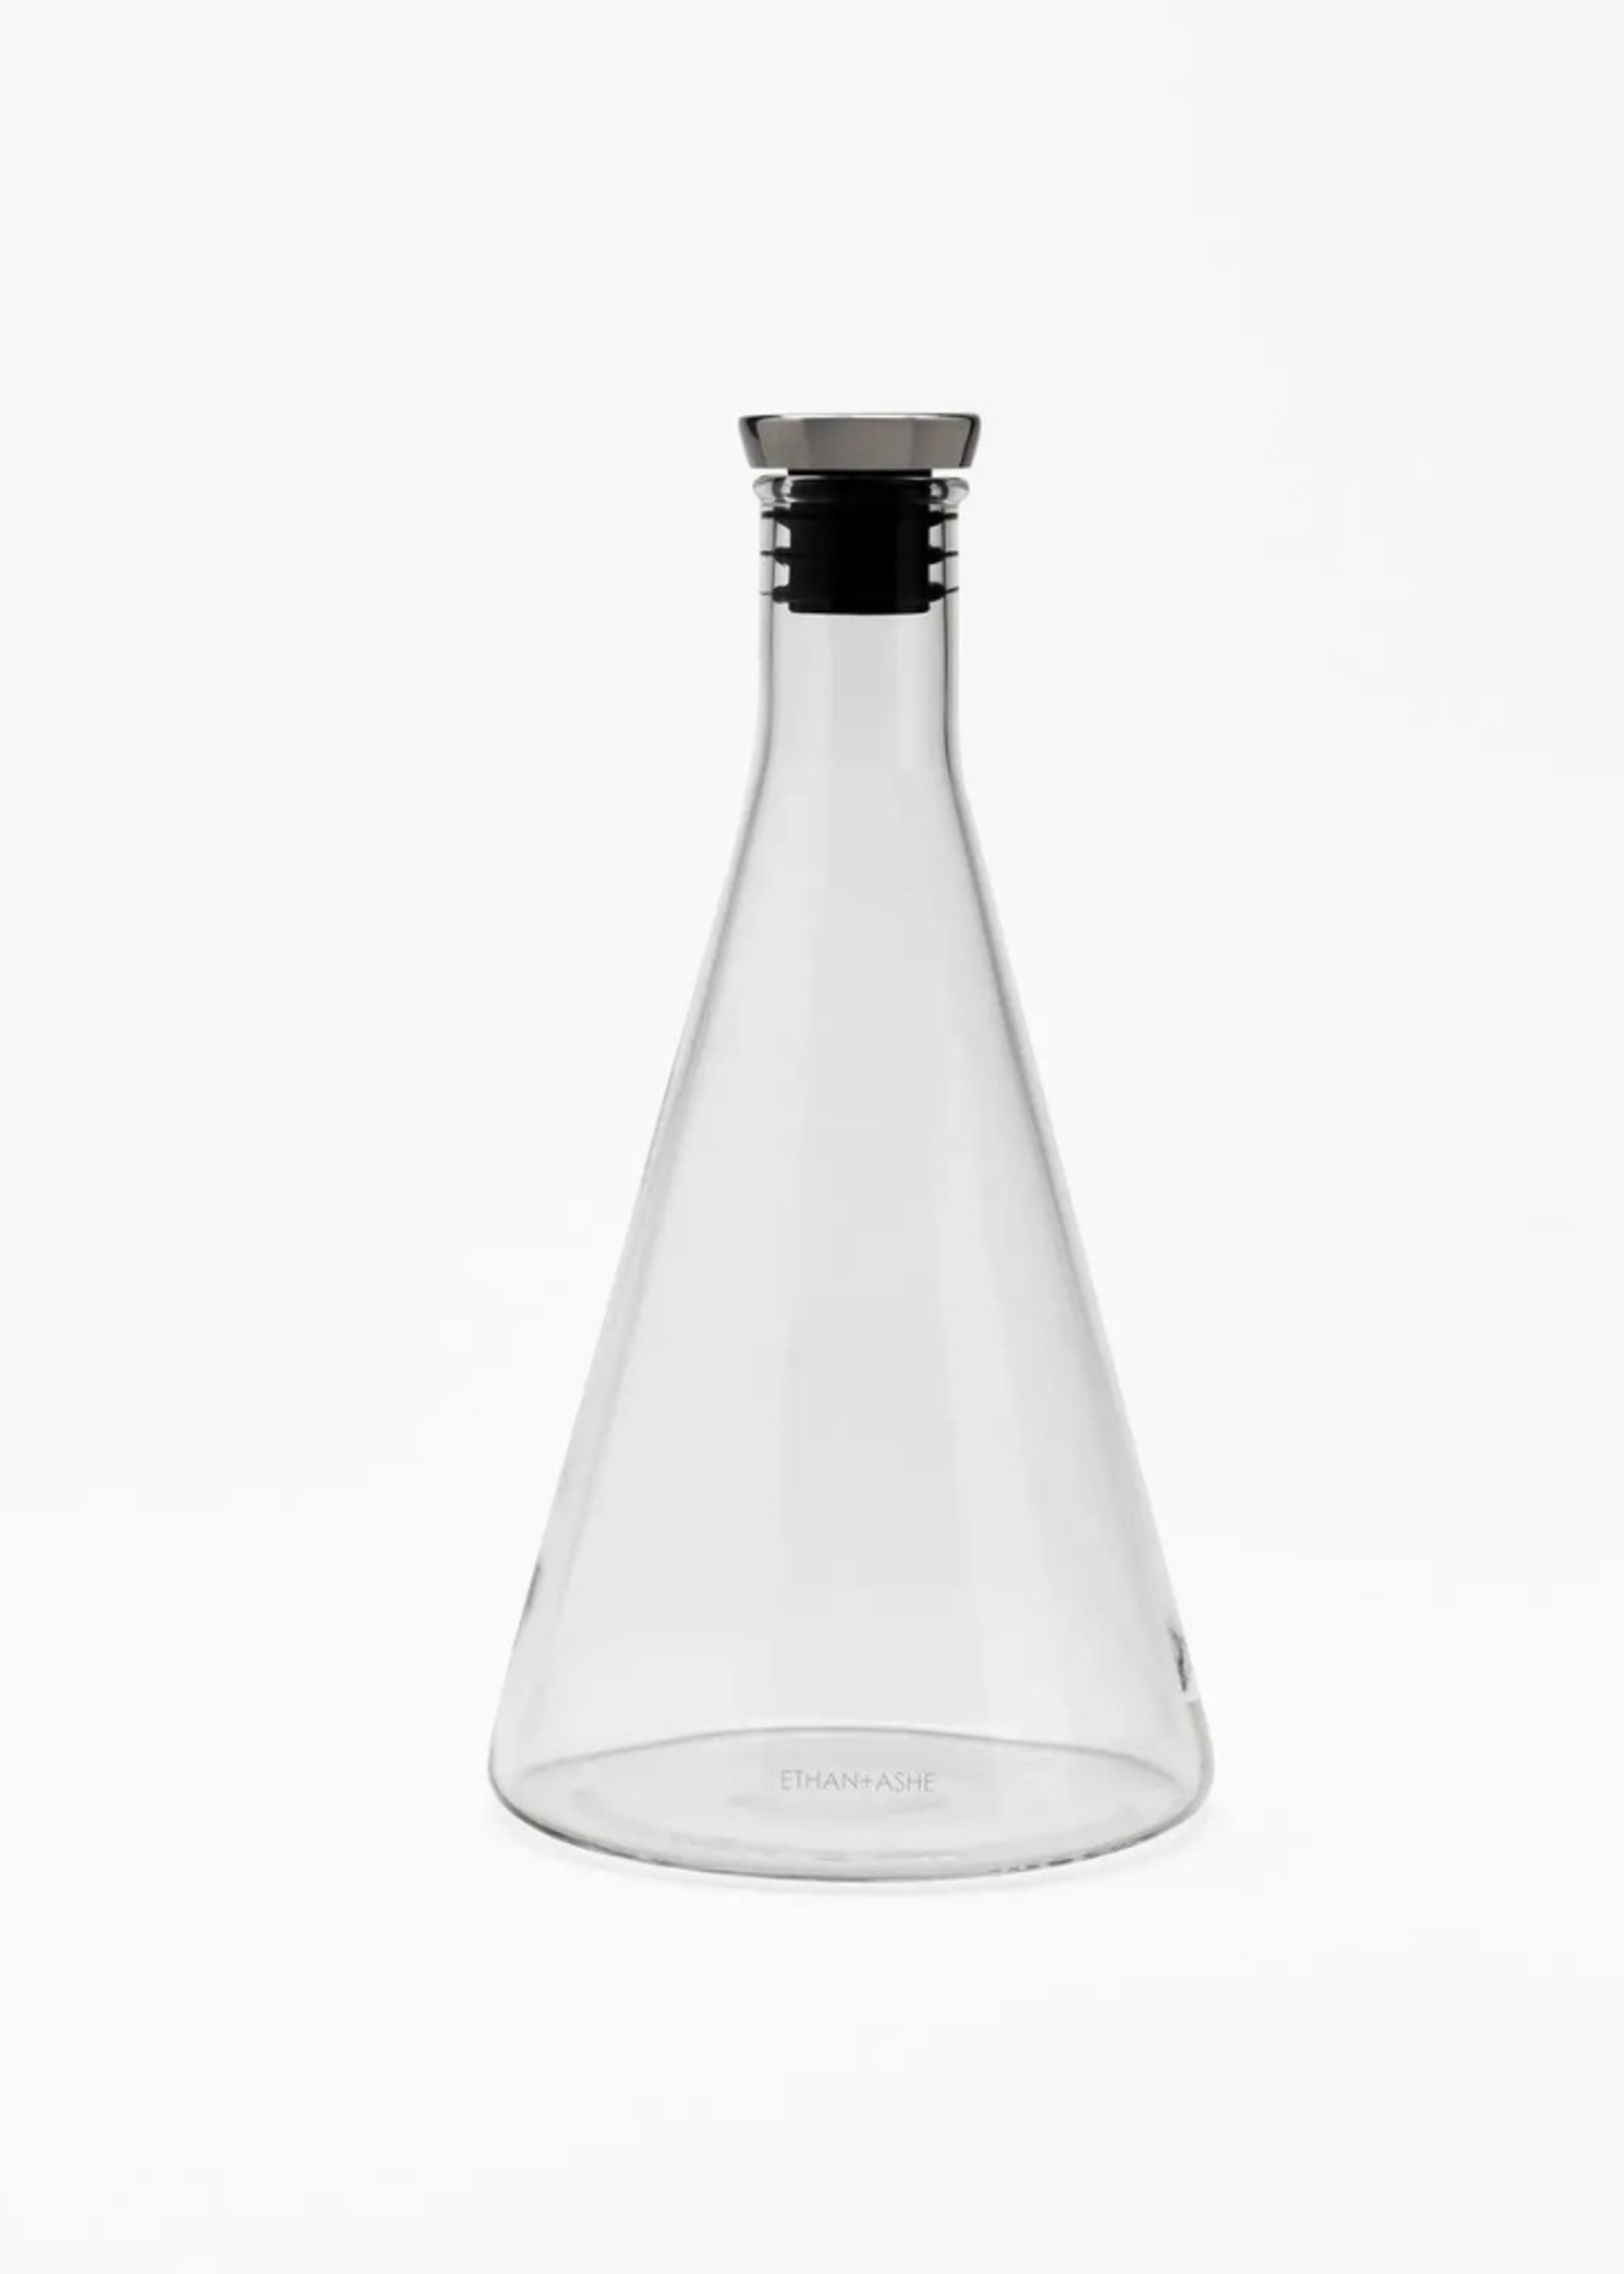 Ethan+Ashe Lab Decanter